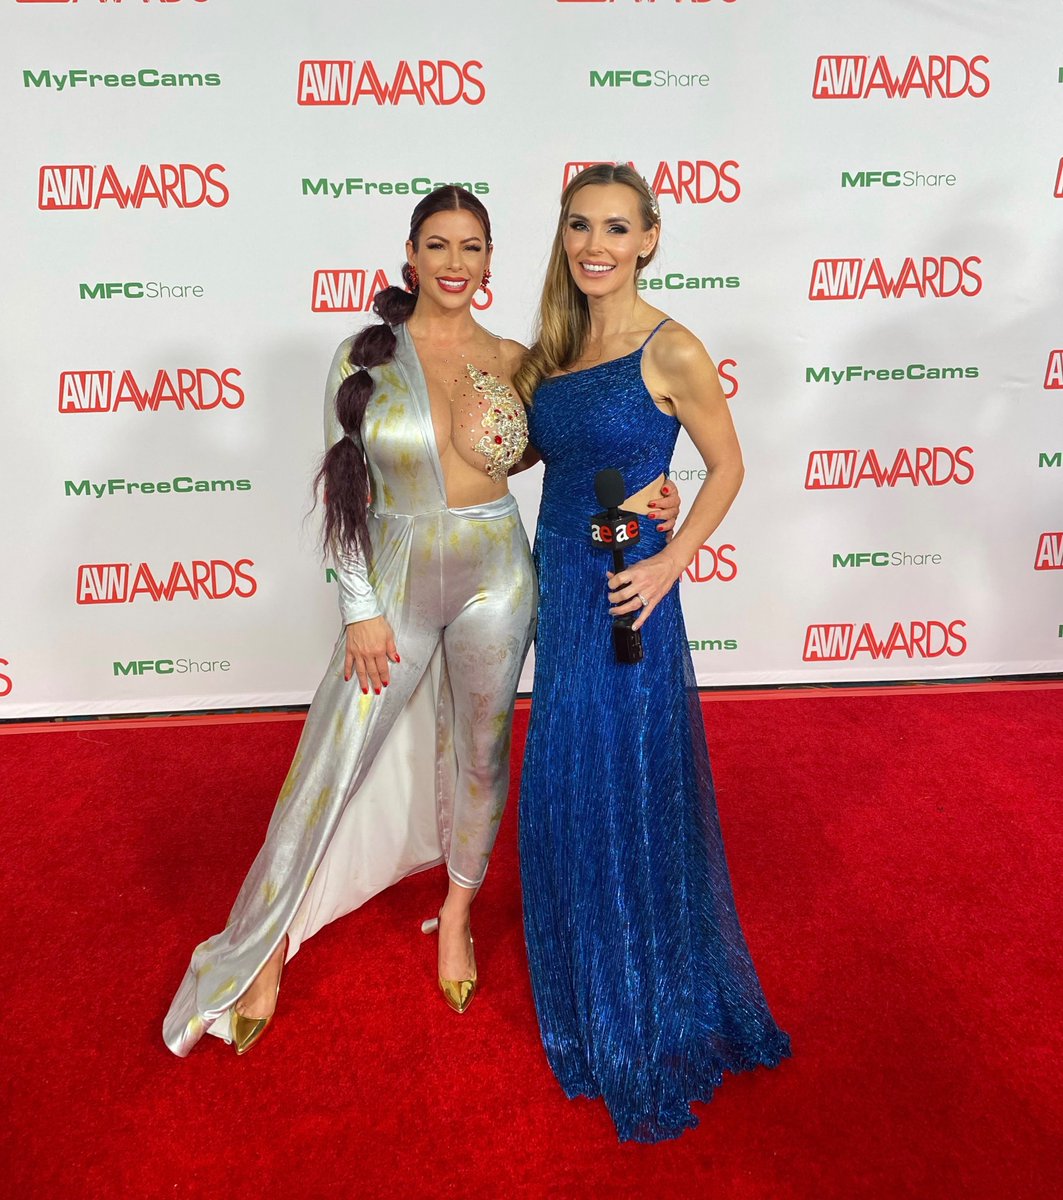 Thanks to @TanyaTate for her amazing red carpet interview with Alexis…and while looking #Stunning in her own right at the same time 📸👏